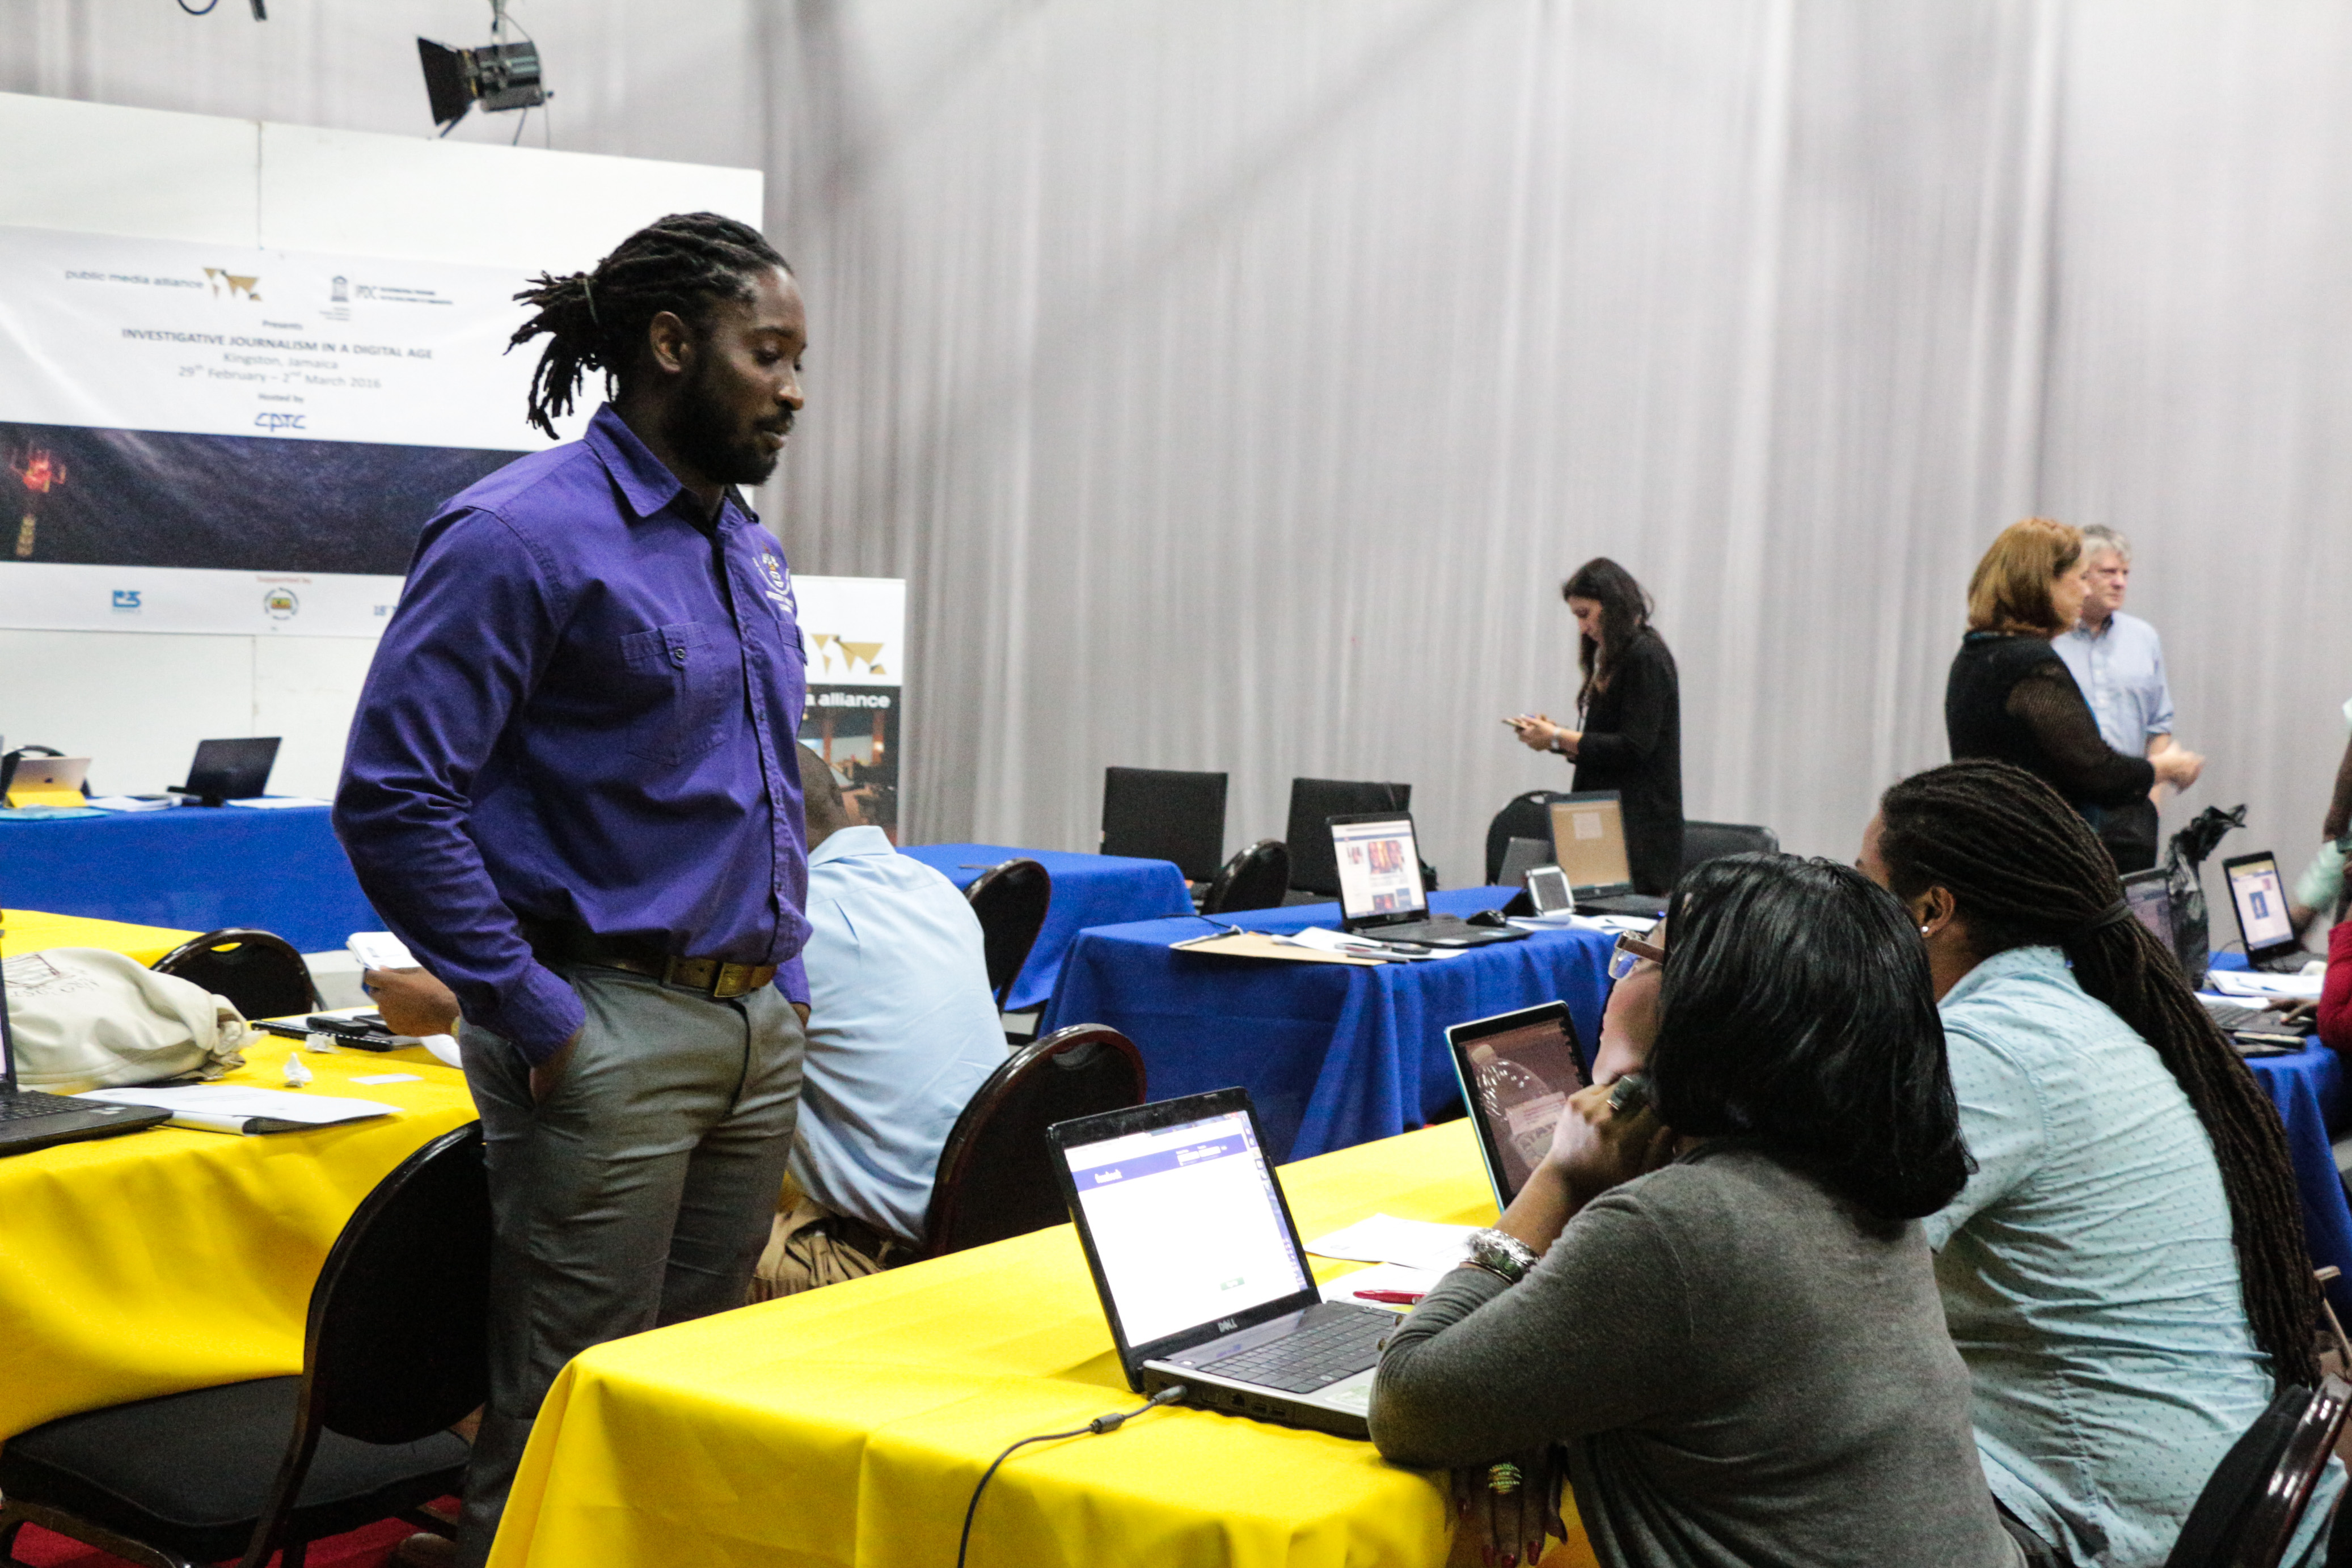 Steffon Campbell talks to participants at the workshop. Image: PMA